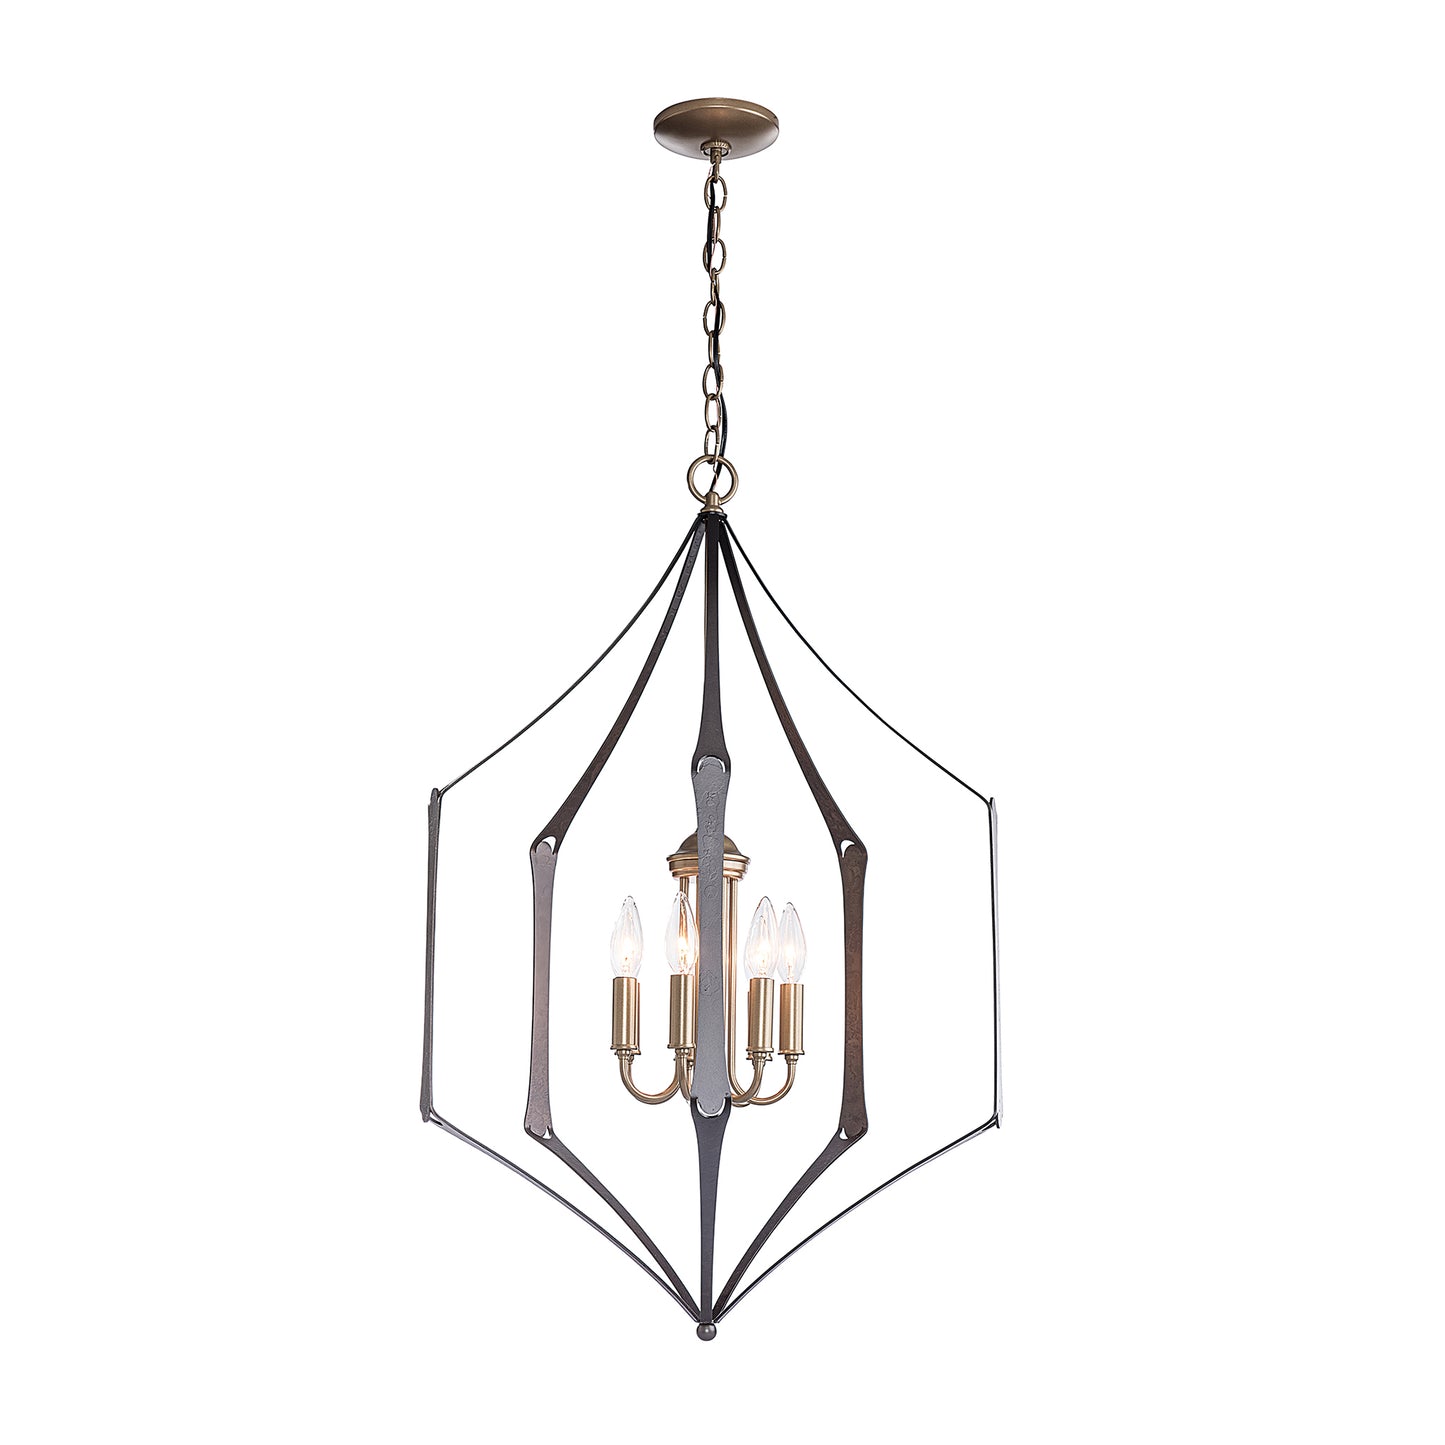 A handcrafted Carousel Chandelier with a metal frame by Hubbardton Forge.